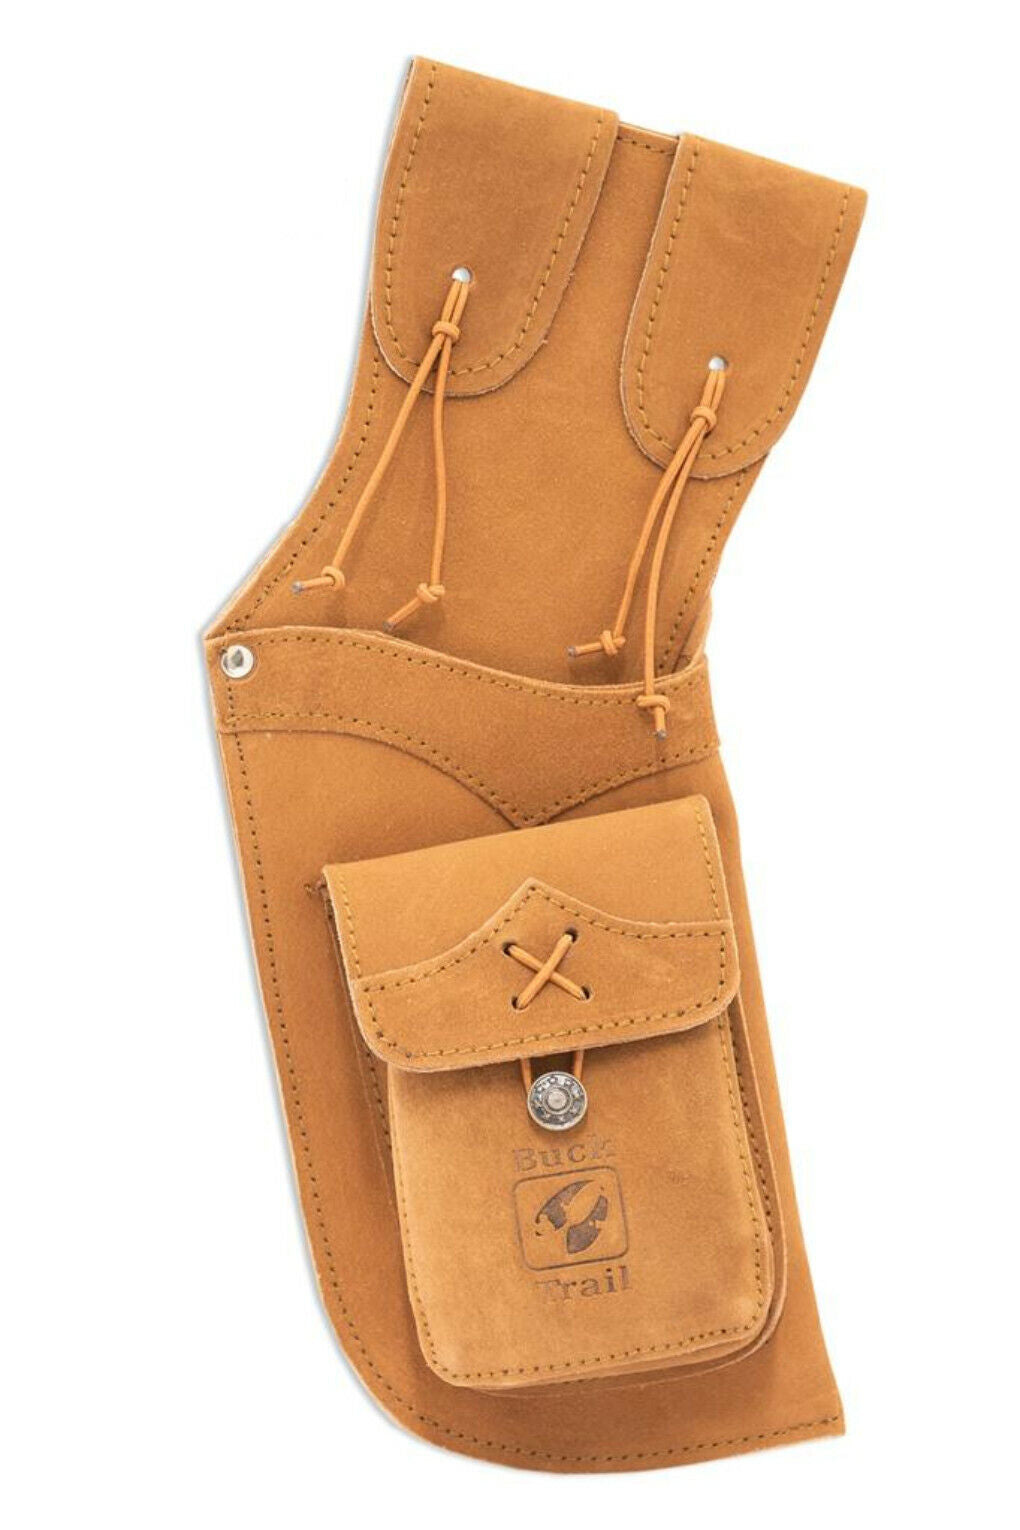 Buck Trail  Traditional Suede Leather Side Field Quiver RH LH